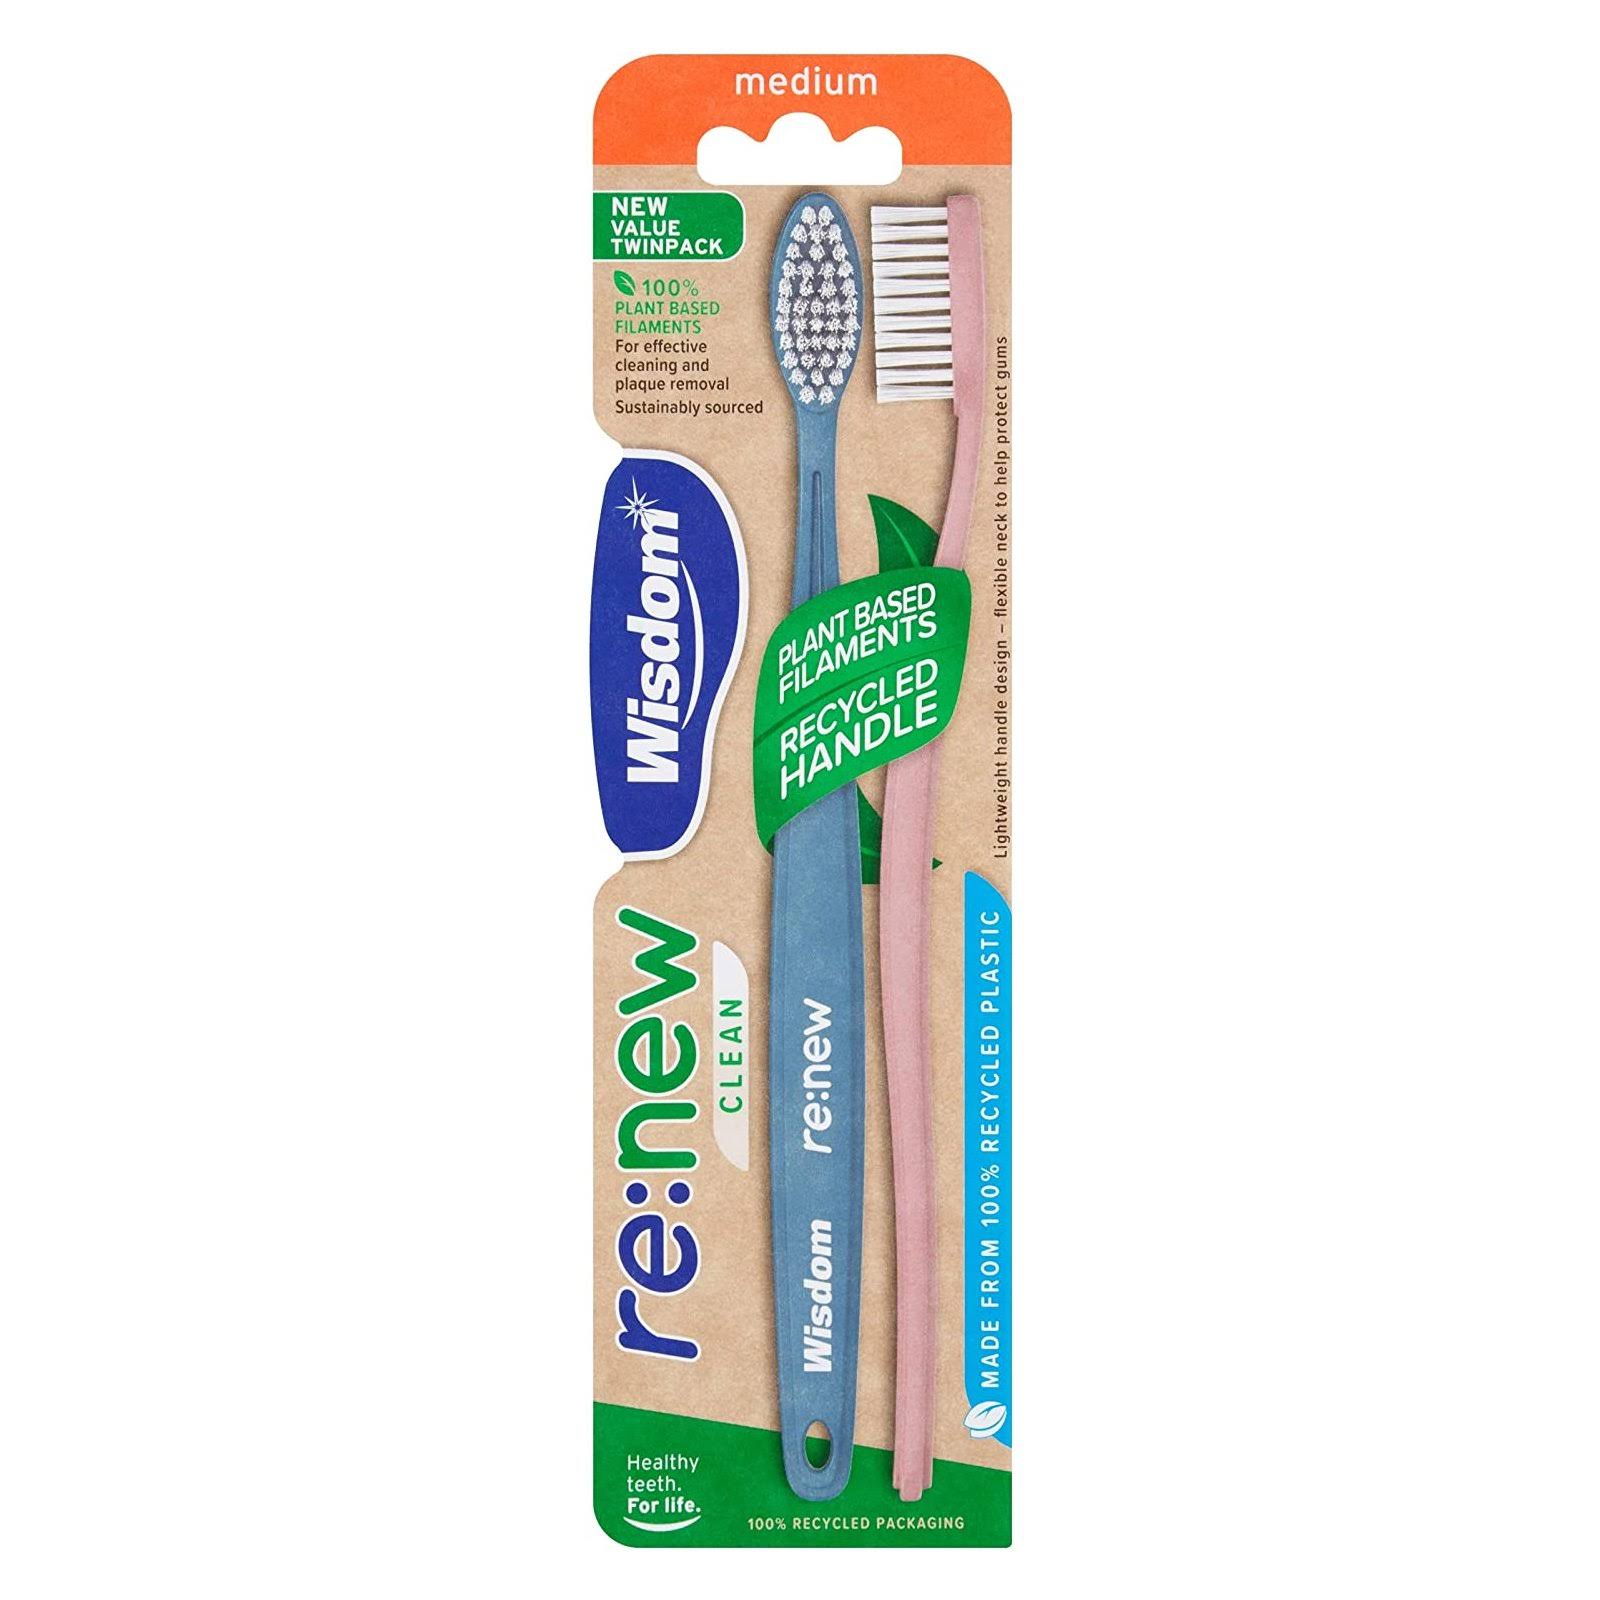 Wisdom Re:New Clean Medium Toothbrush Twin Pack 1x2pack